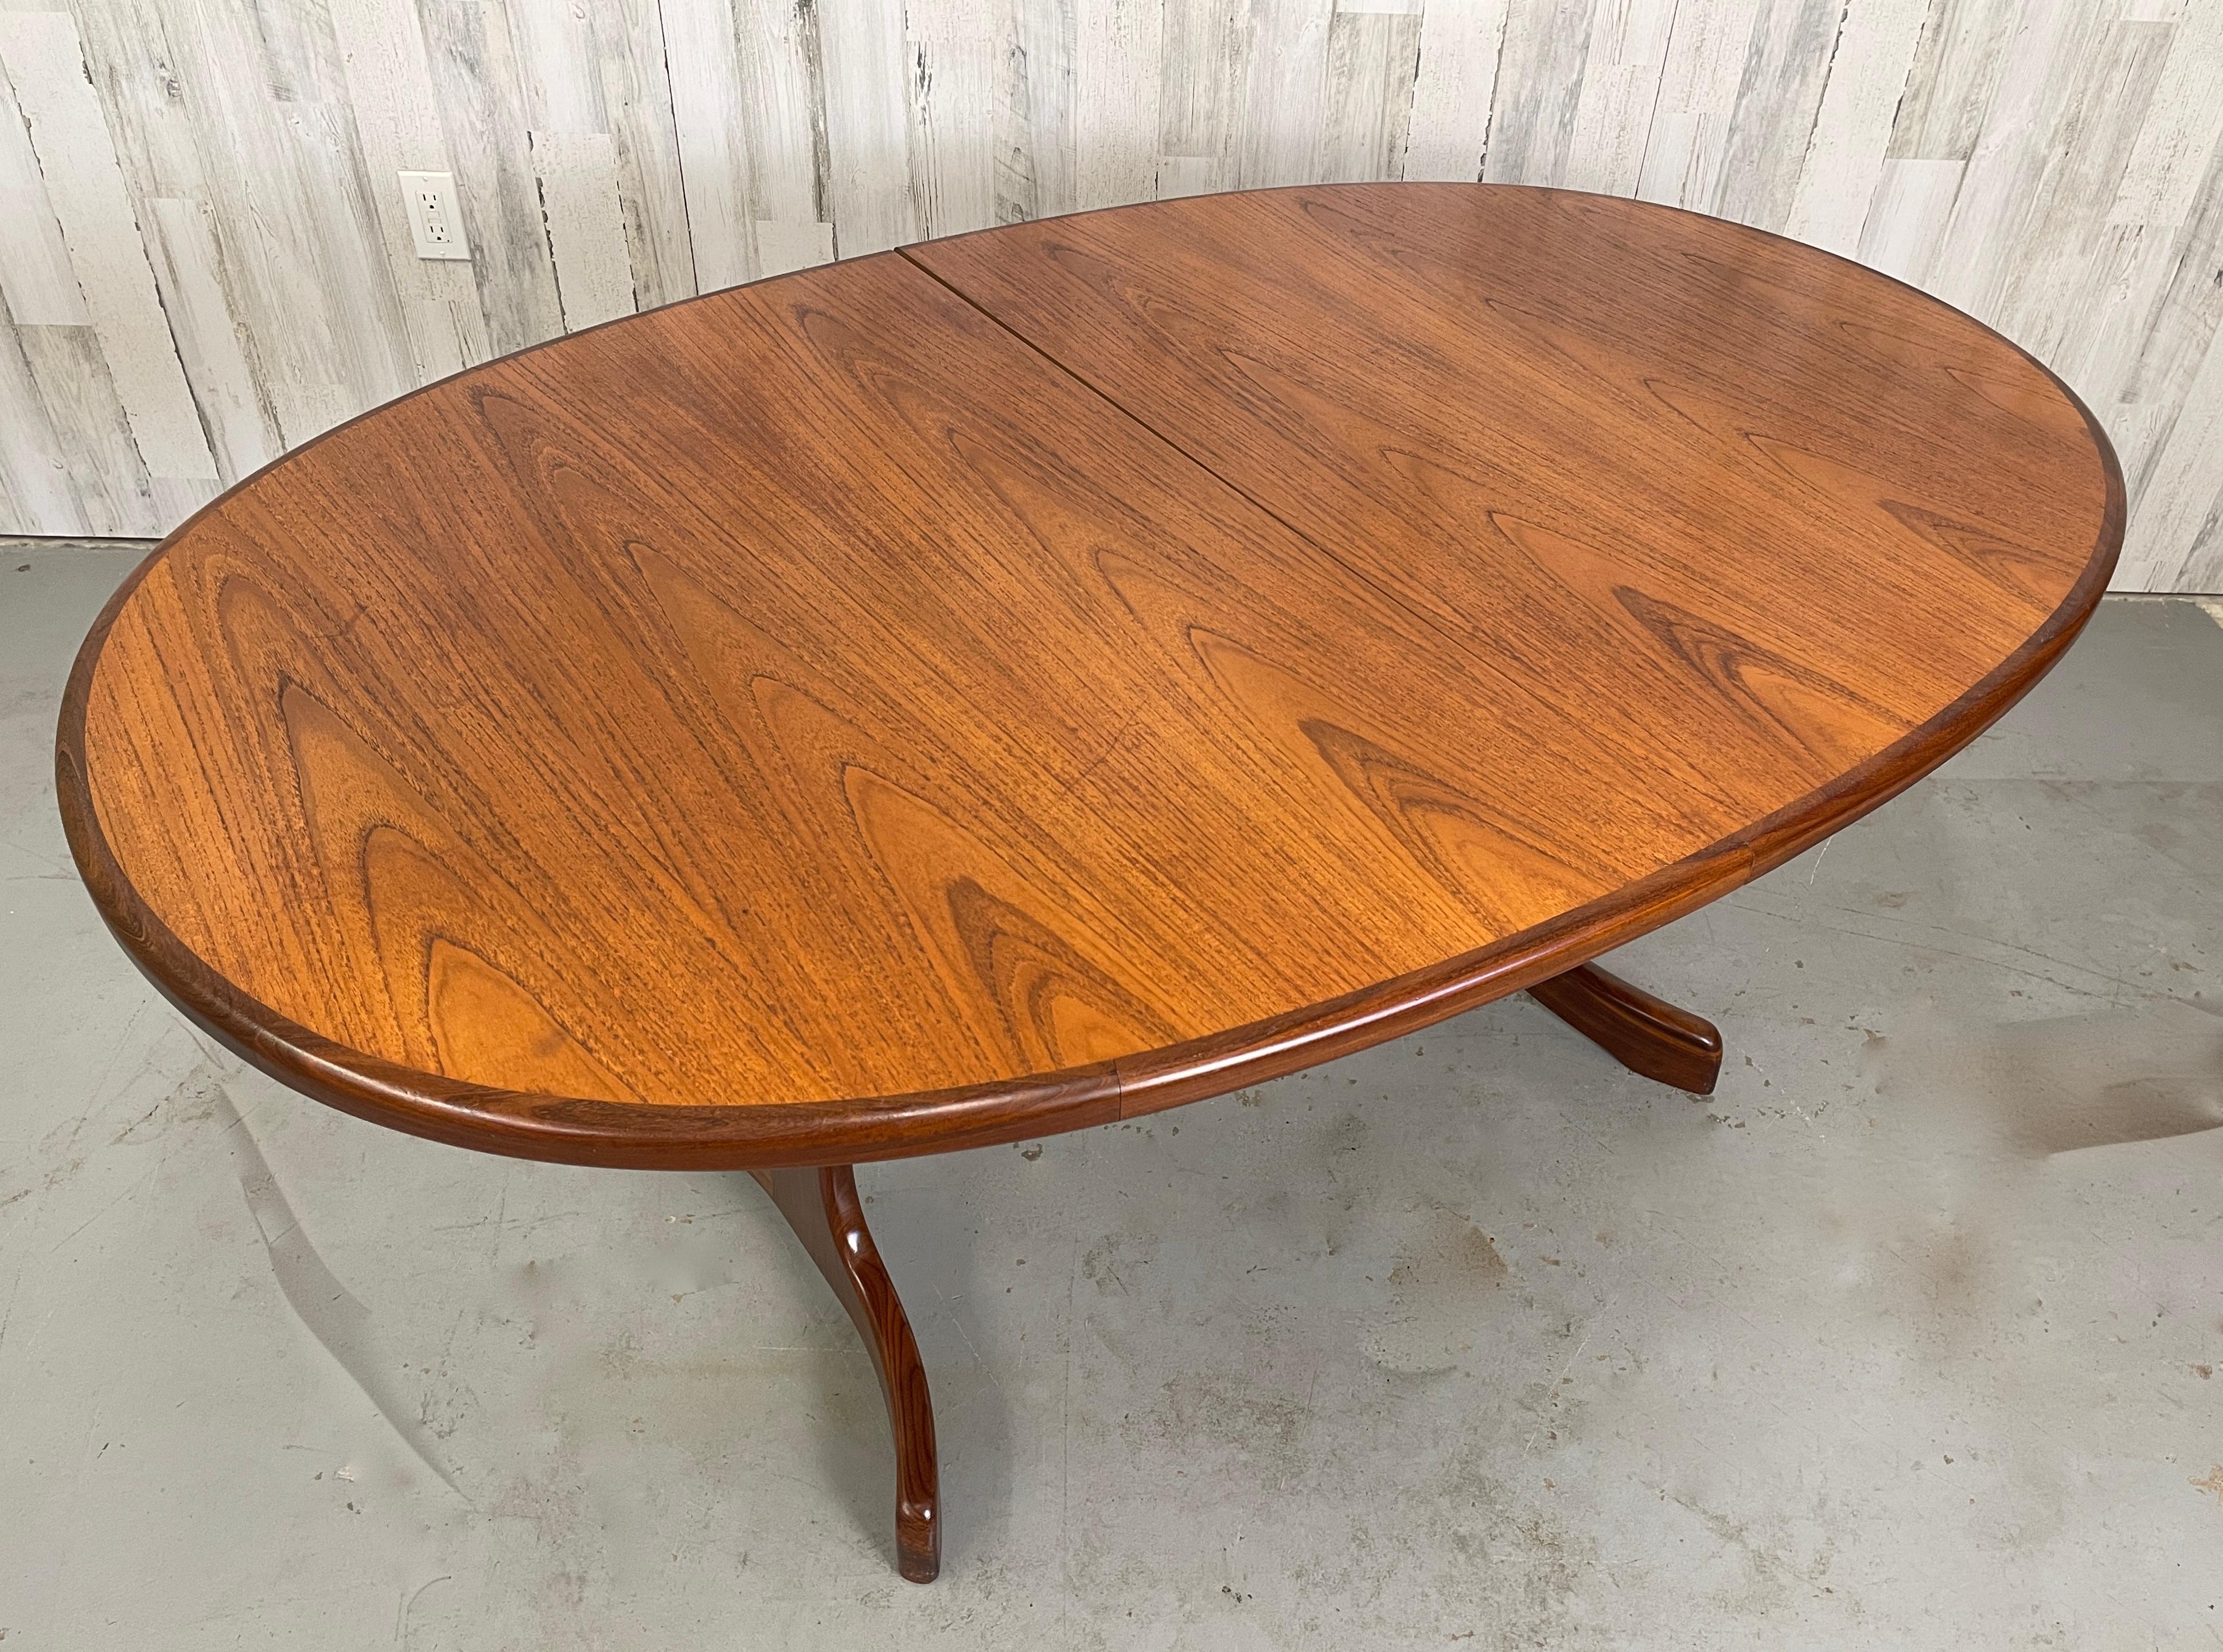 “G-Plan” extendable teak dining table with butterfly leaf. Very good original condition.
Measurements with leaf 82.25 L x 42 D.